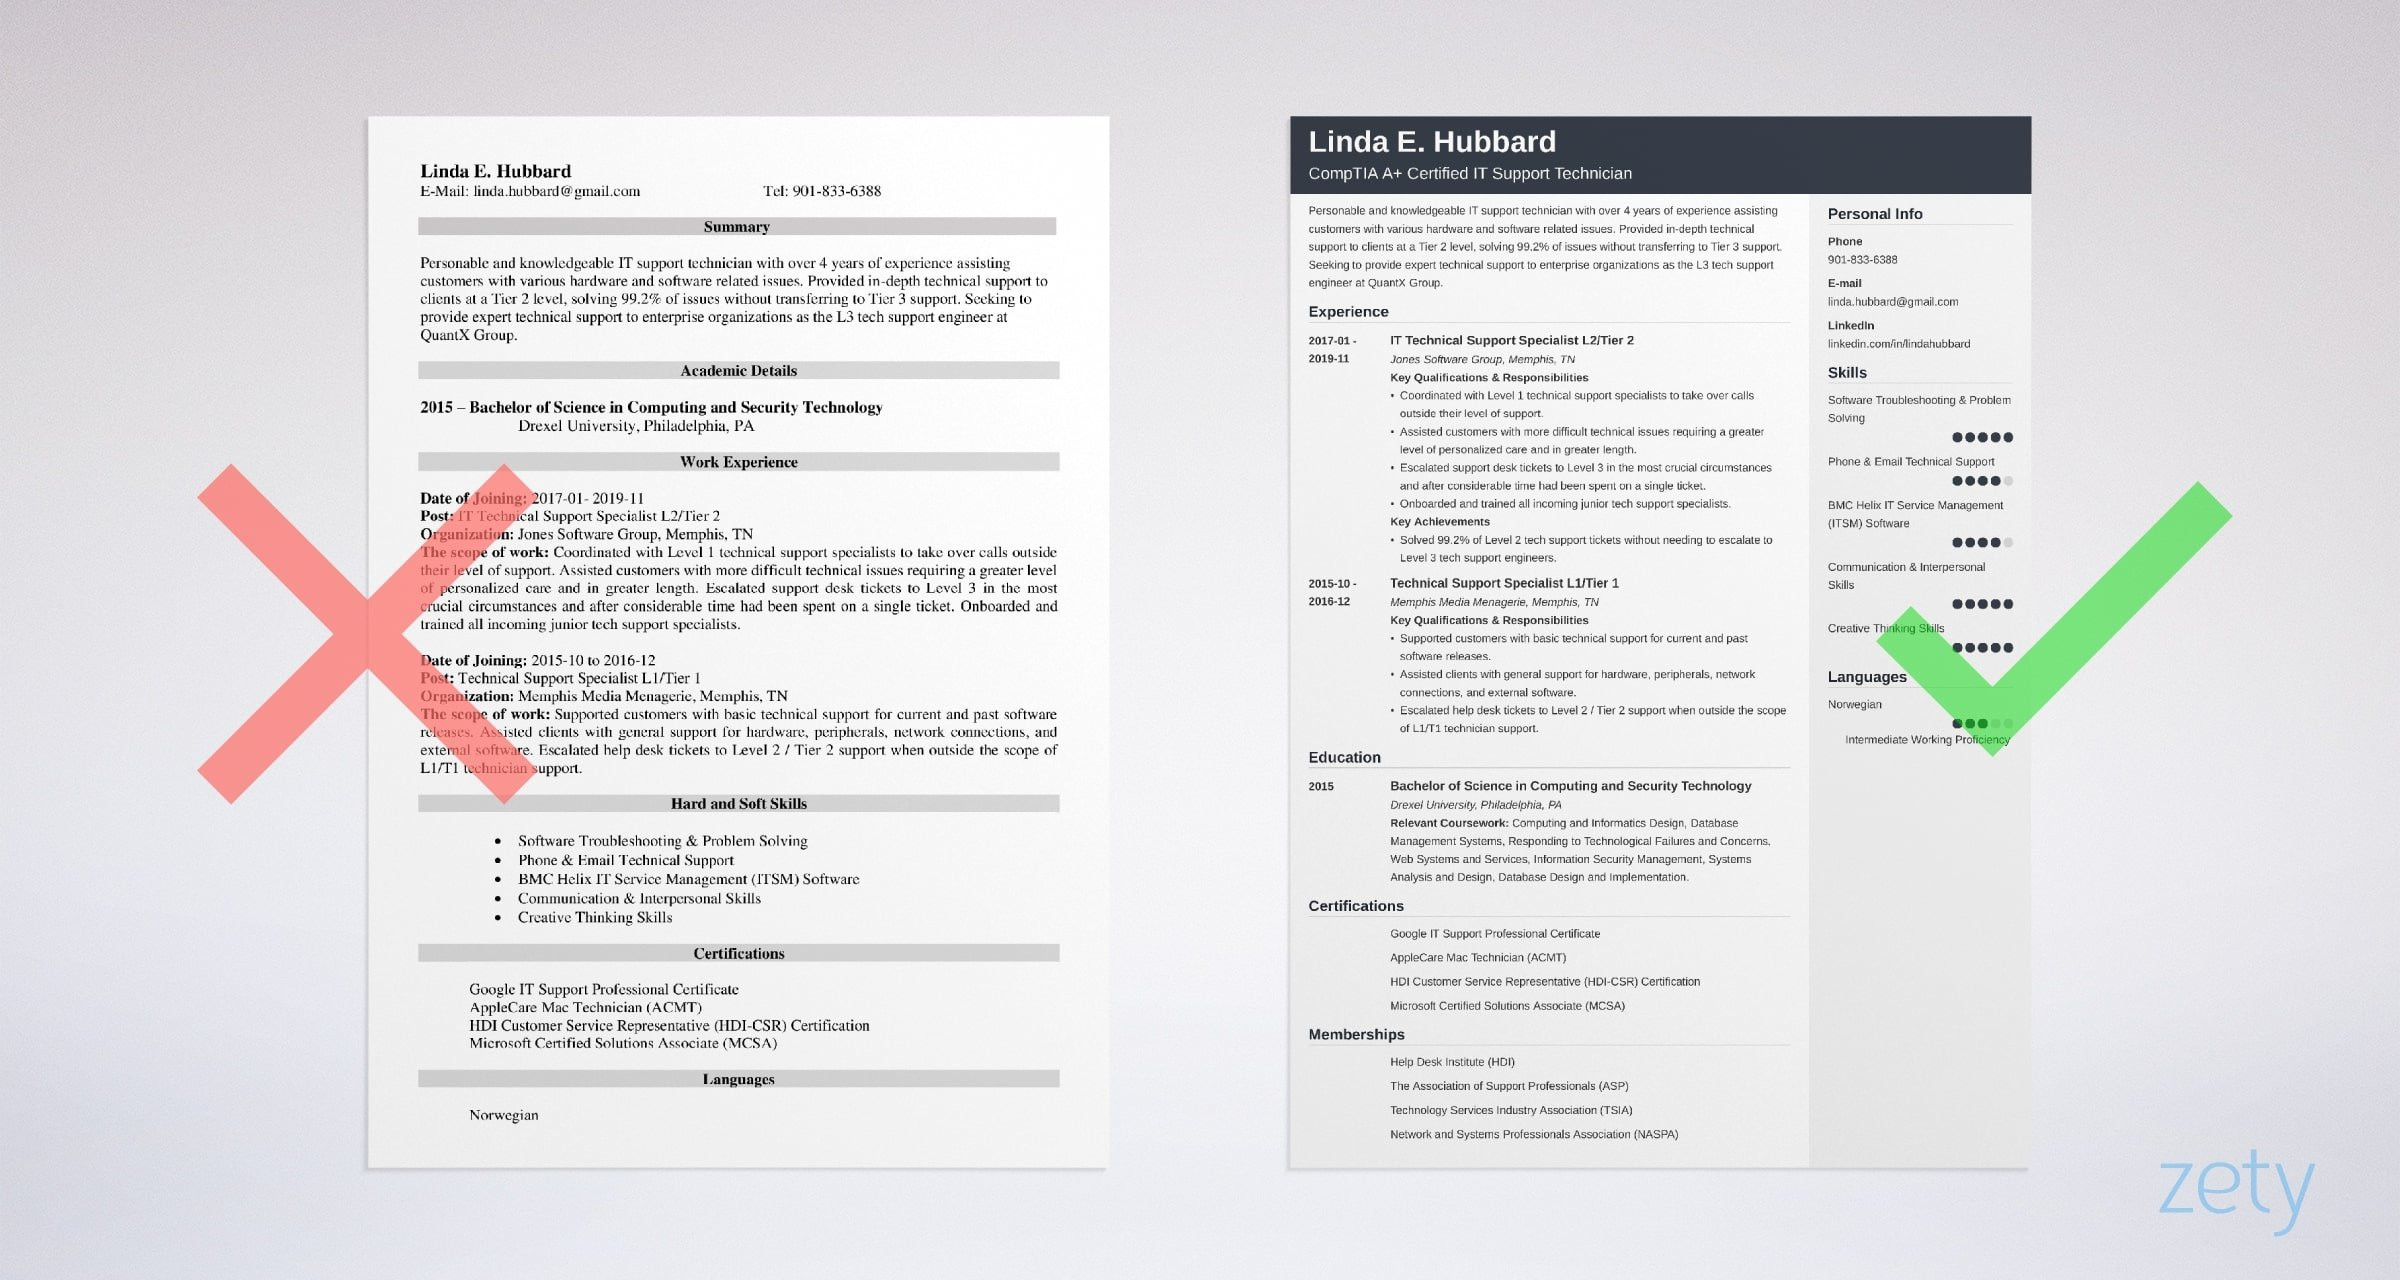 Sample Resume Of Email Support Executive Technical Support Resume Sample & Job Description [20 Tips]